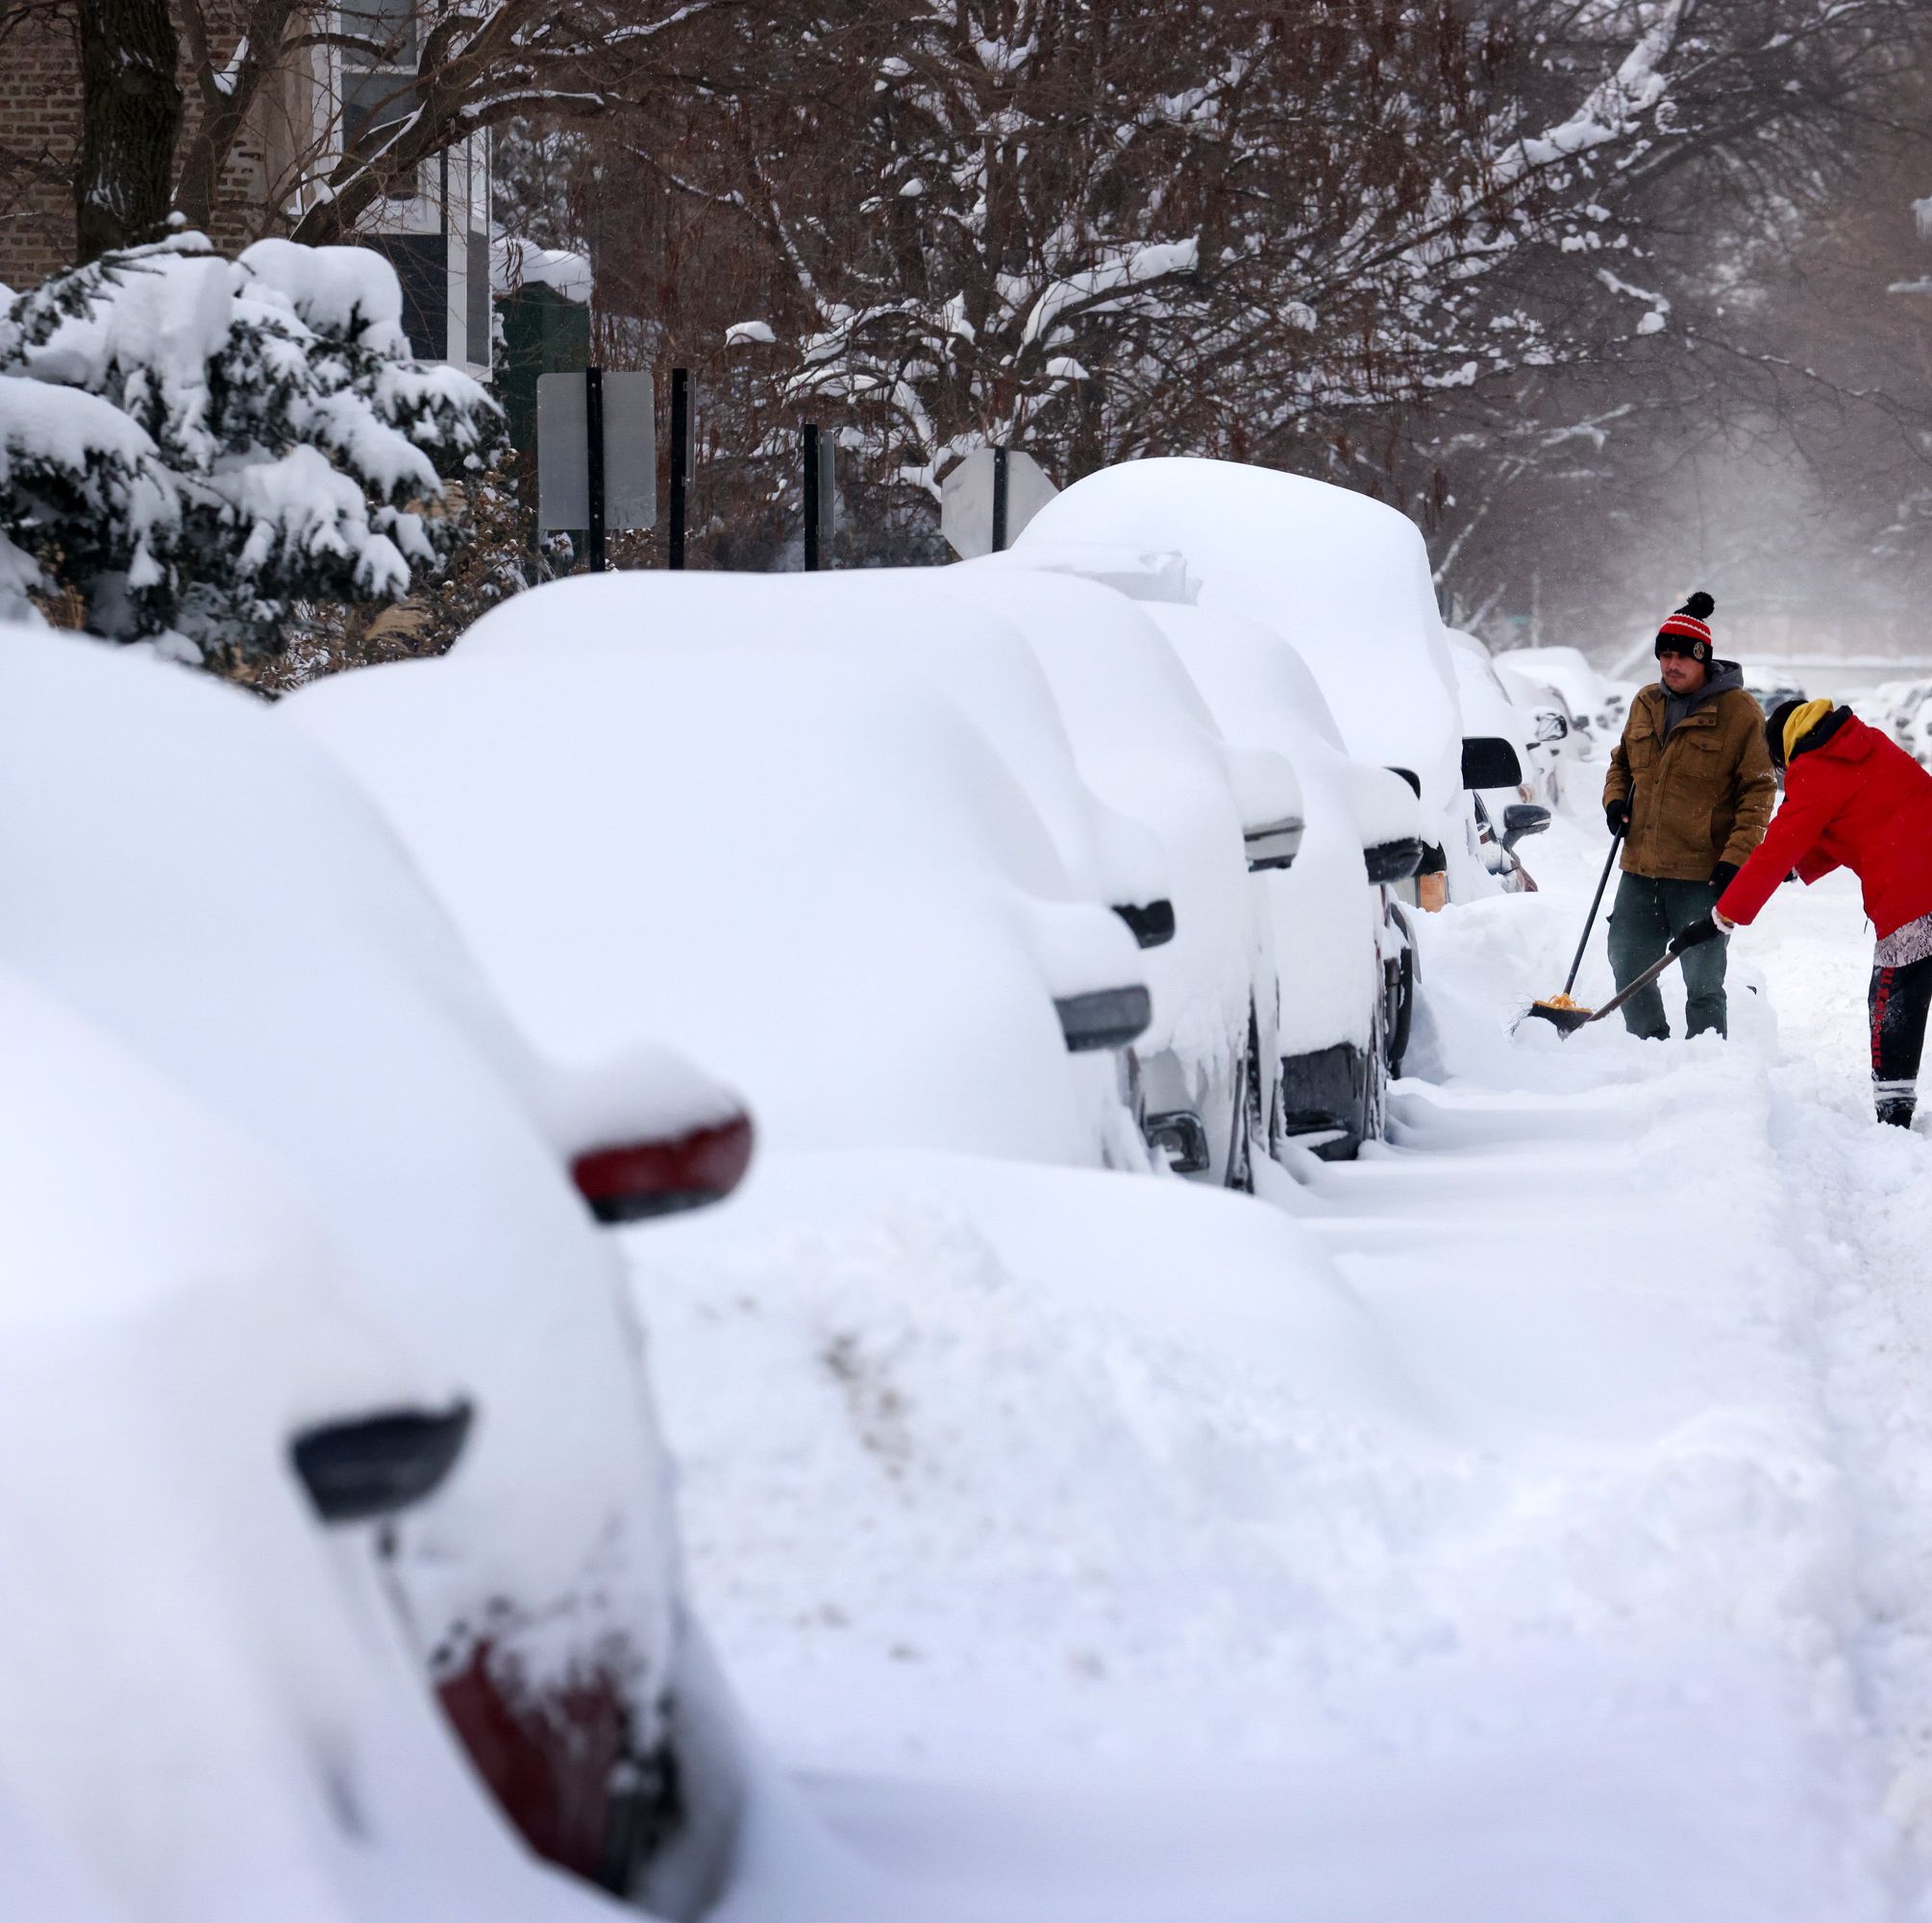 Why Lake Effect Snow Storms Form So Quickly—and Pack a Serious Punch